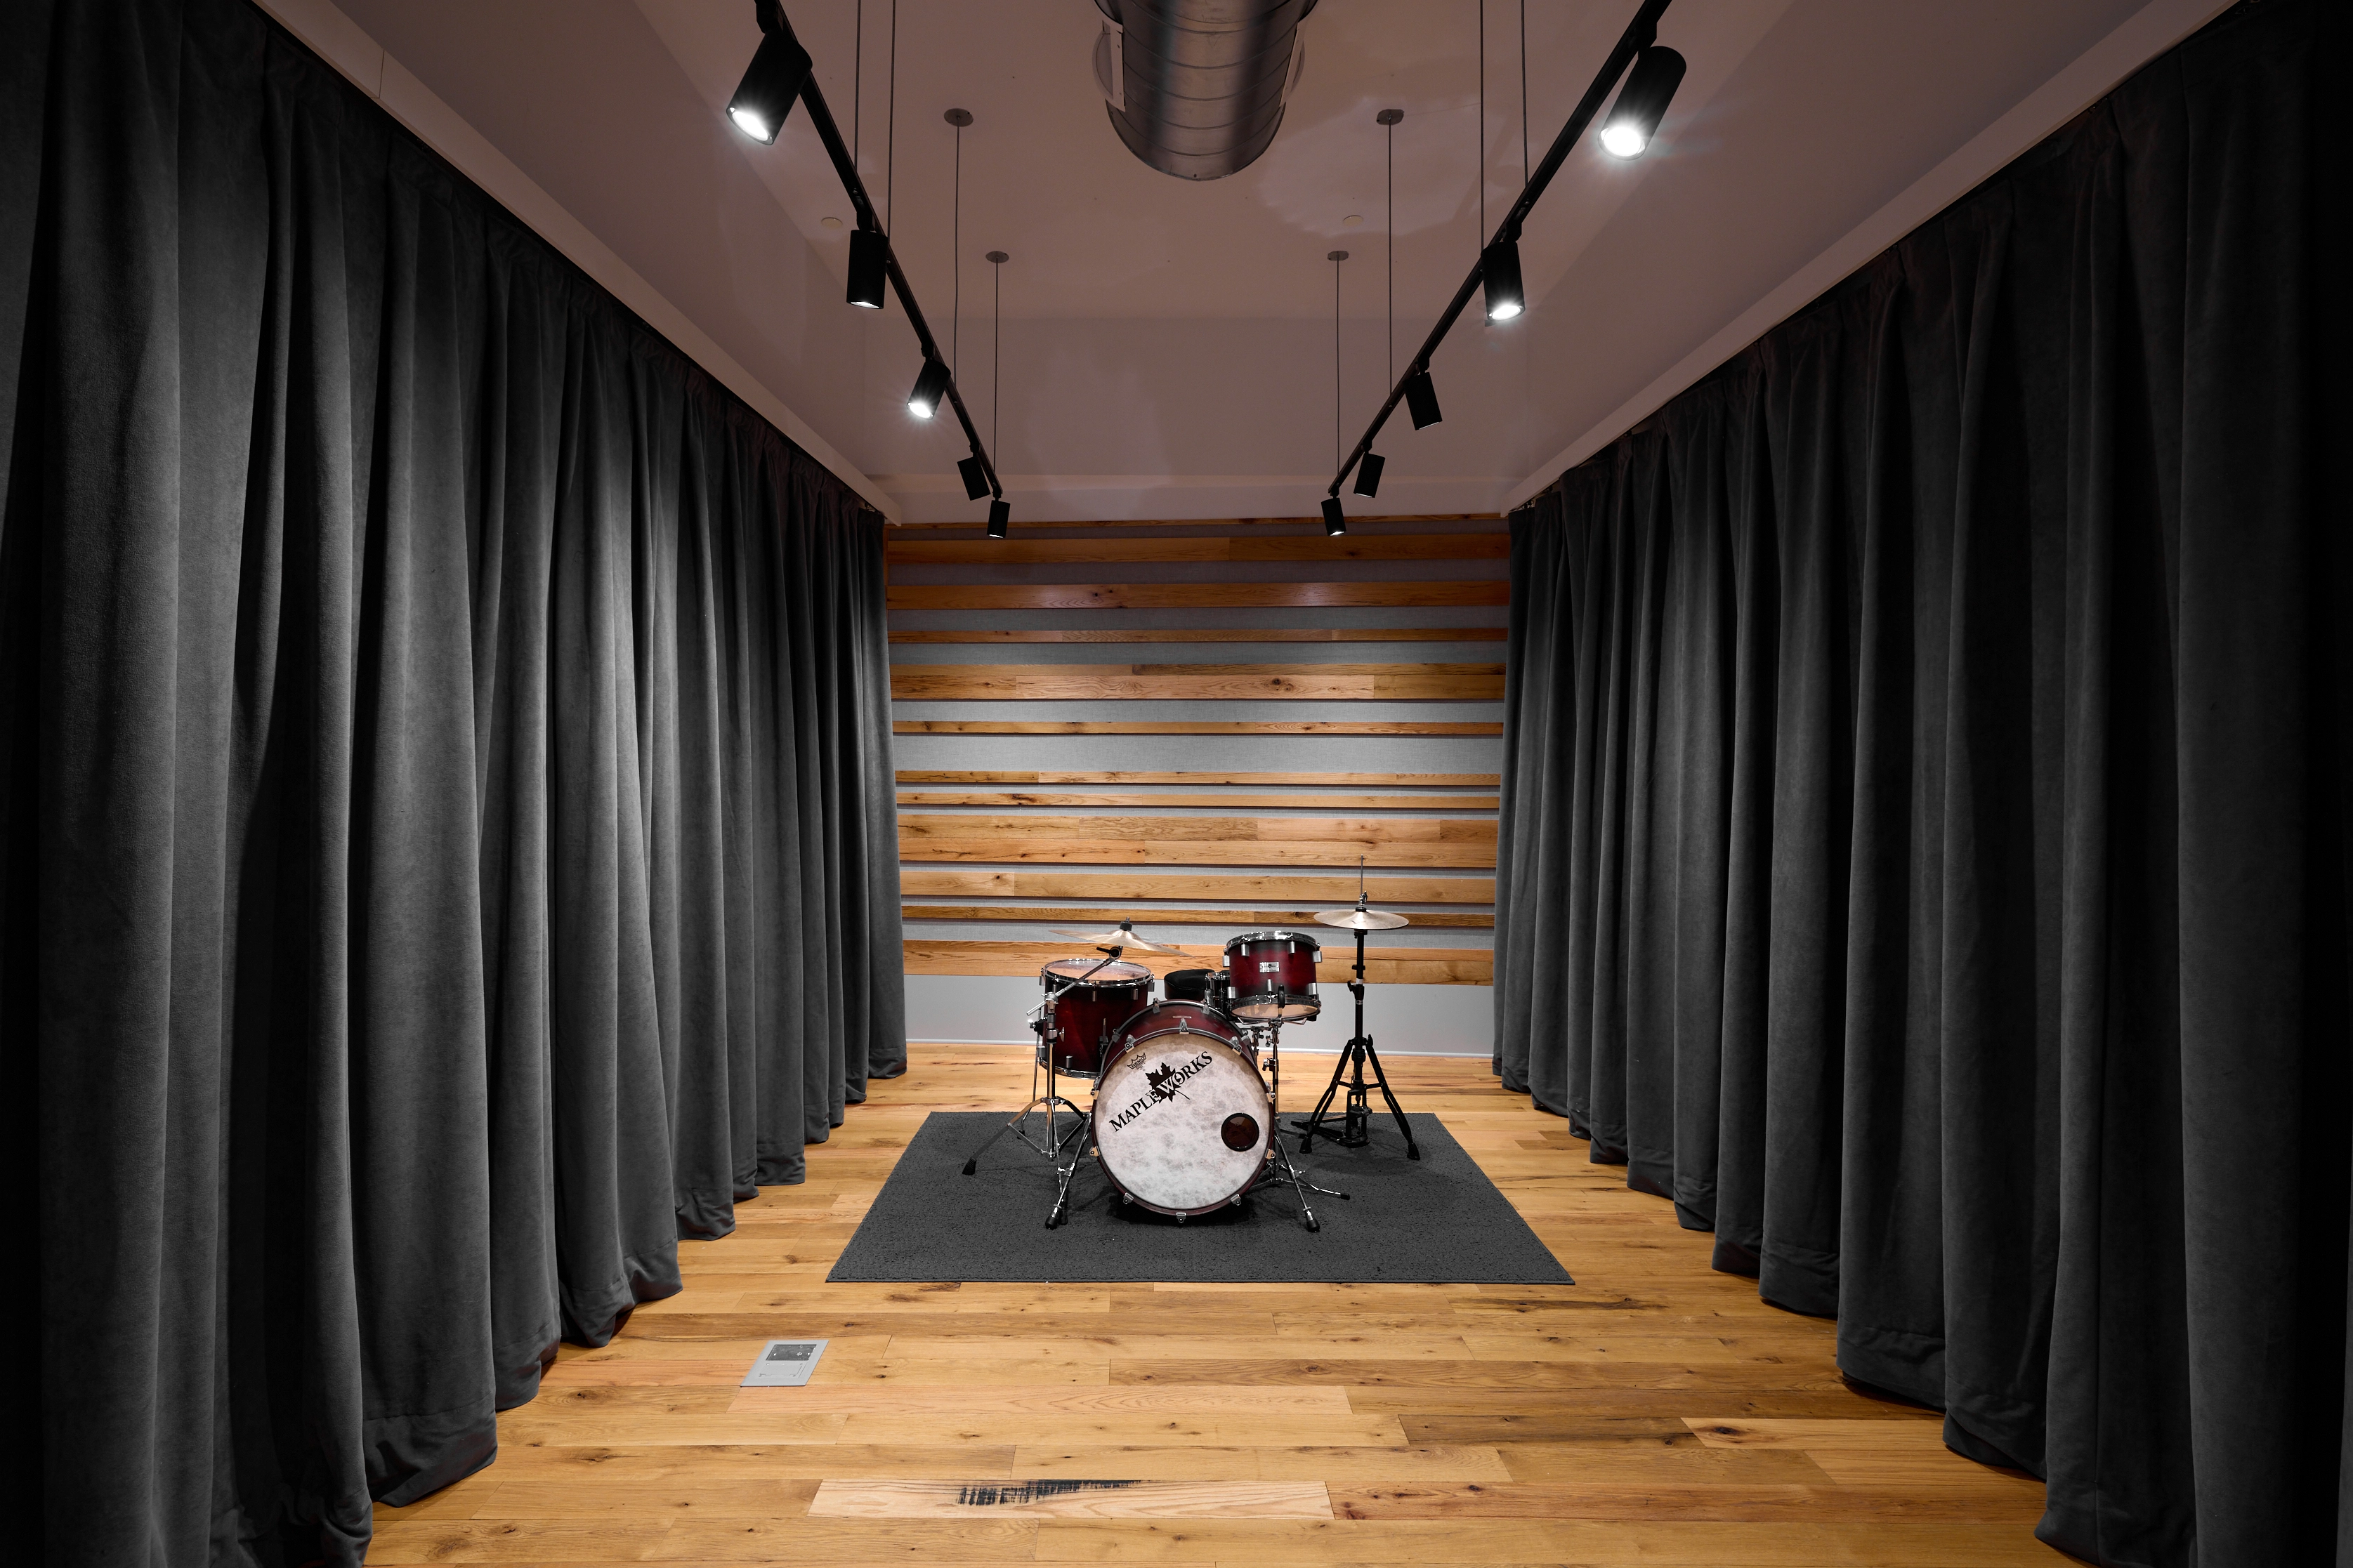 Studio B live room with curtained walls and drumset